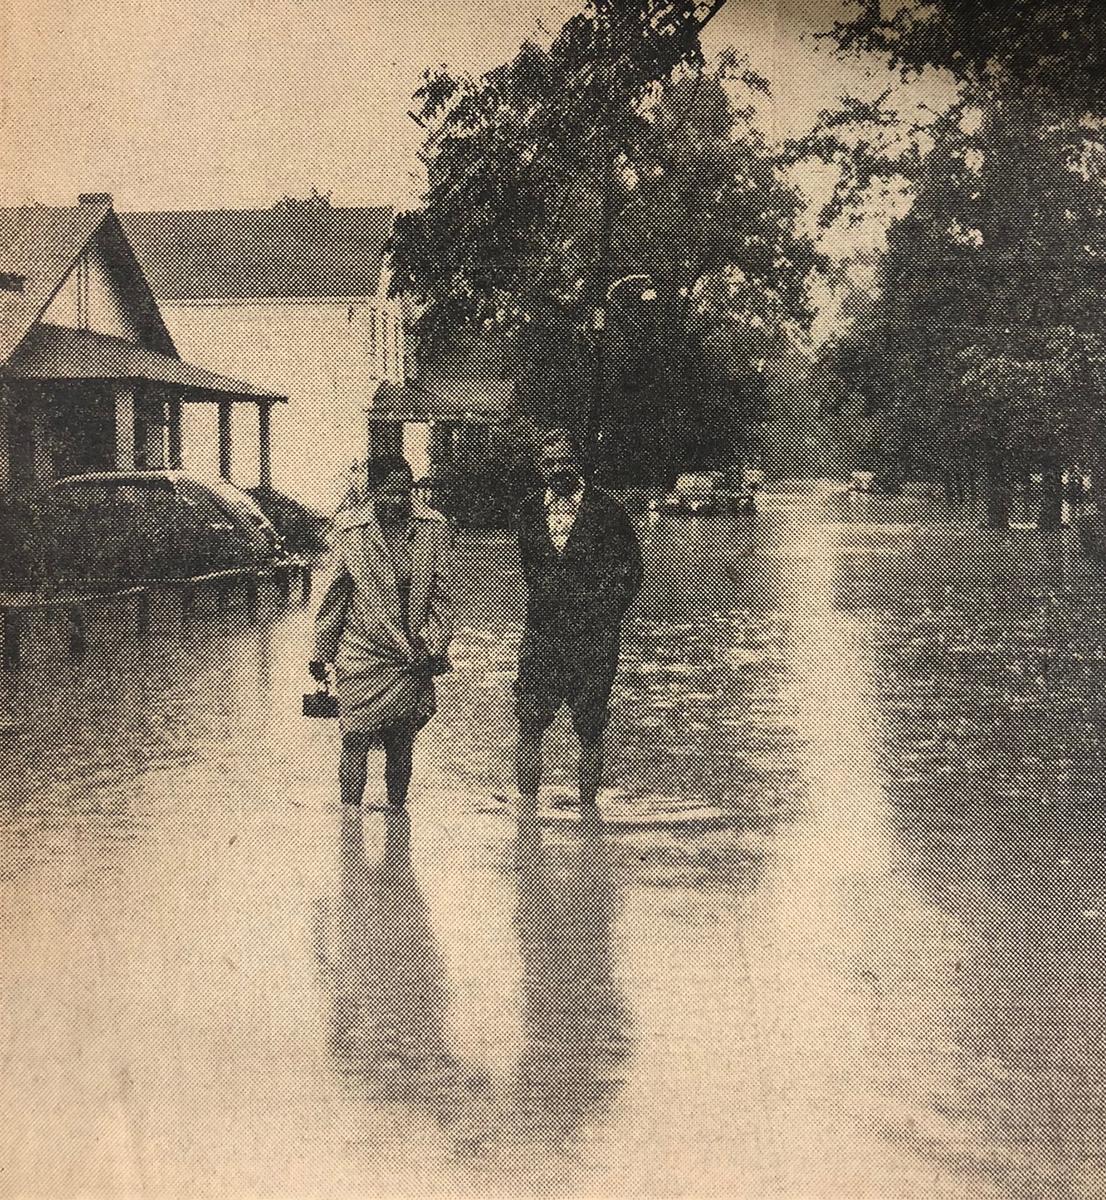 Print magazine image of a couple walking through flooded streets of North Brentwood, Md. in 1955.